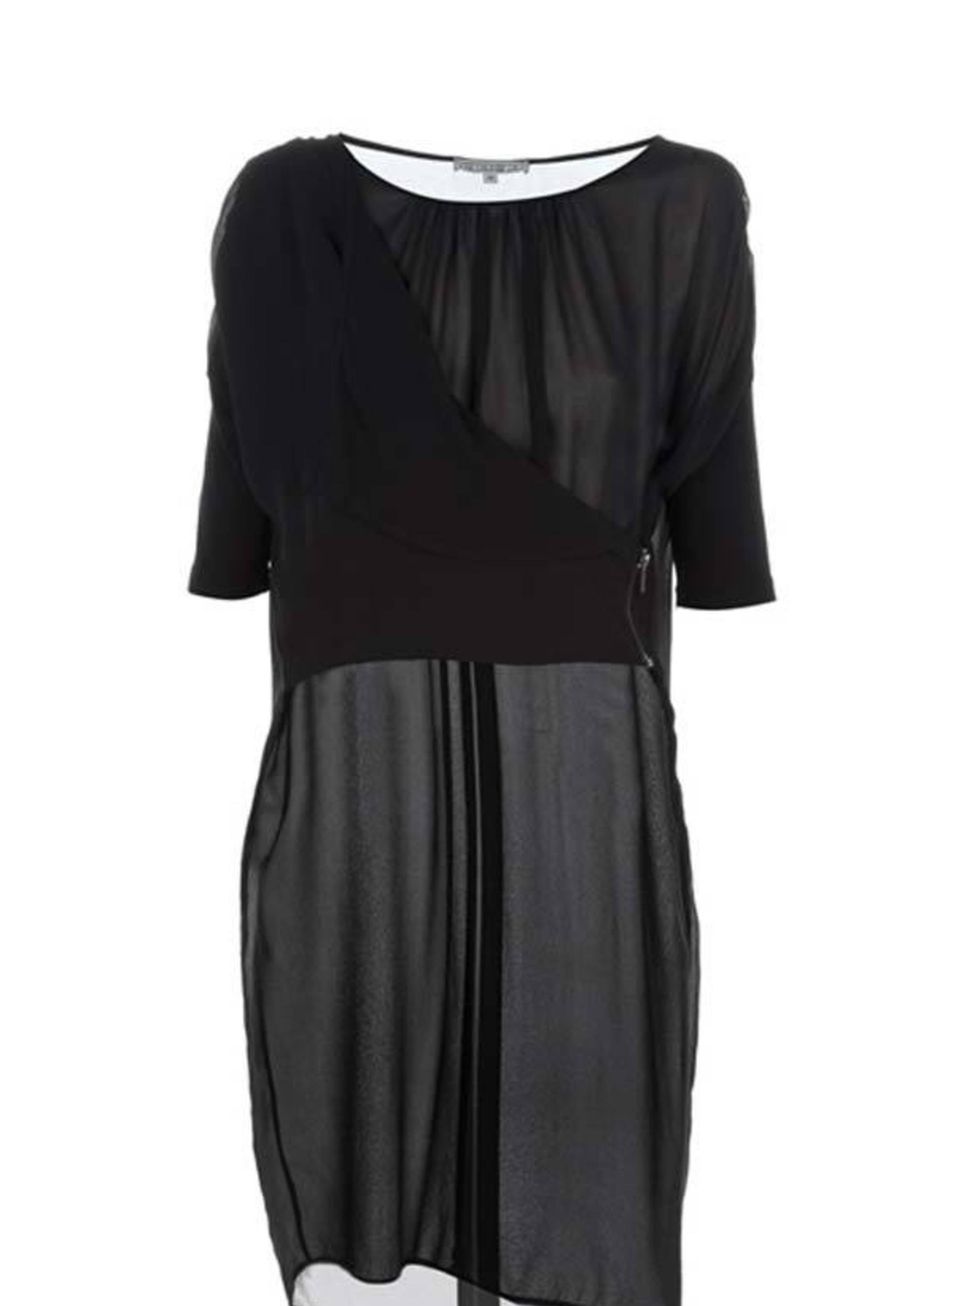 <p> </p><p>Understated and ultra chic chic, this sheer black tunic dress will ensure youre stylish from the office to a dinner date Dagmar sheer dress, £179, at <a href="http://www.no-one.co.uk/item10061489.aspx">No-One</a></p>